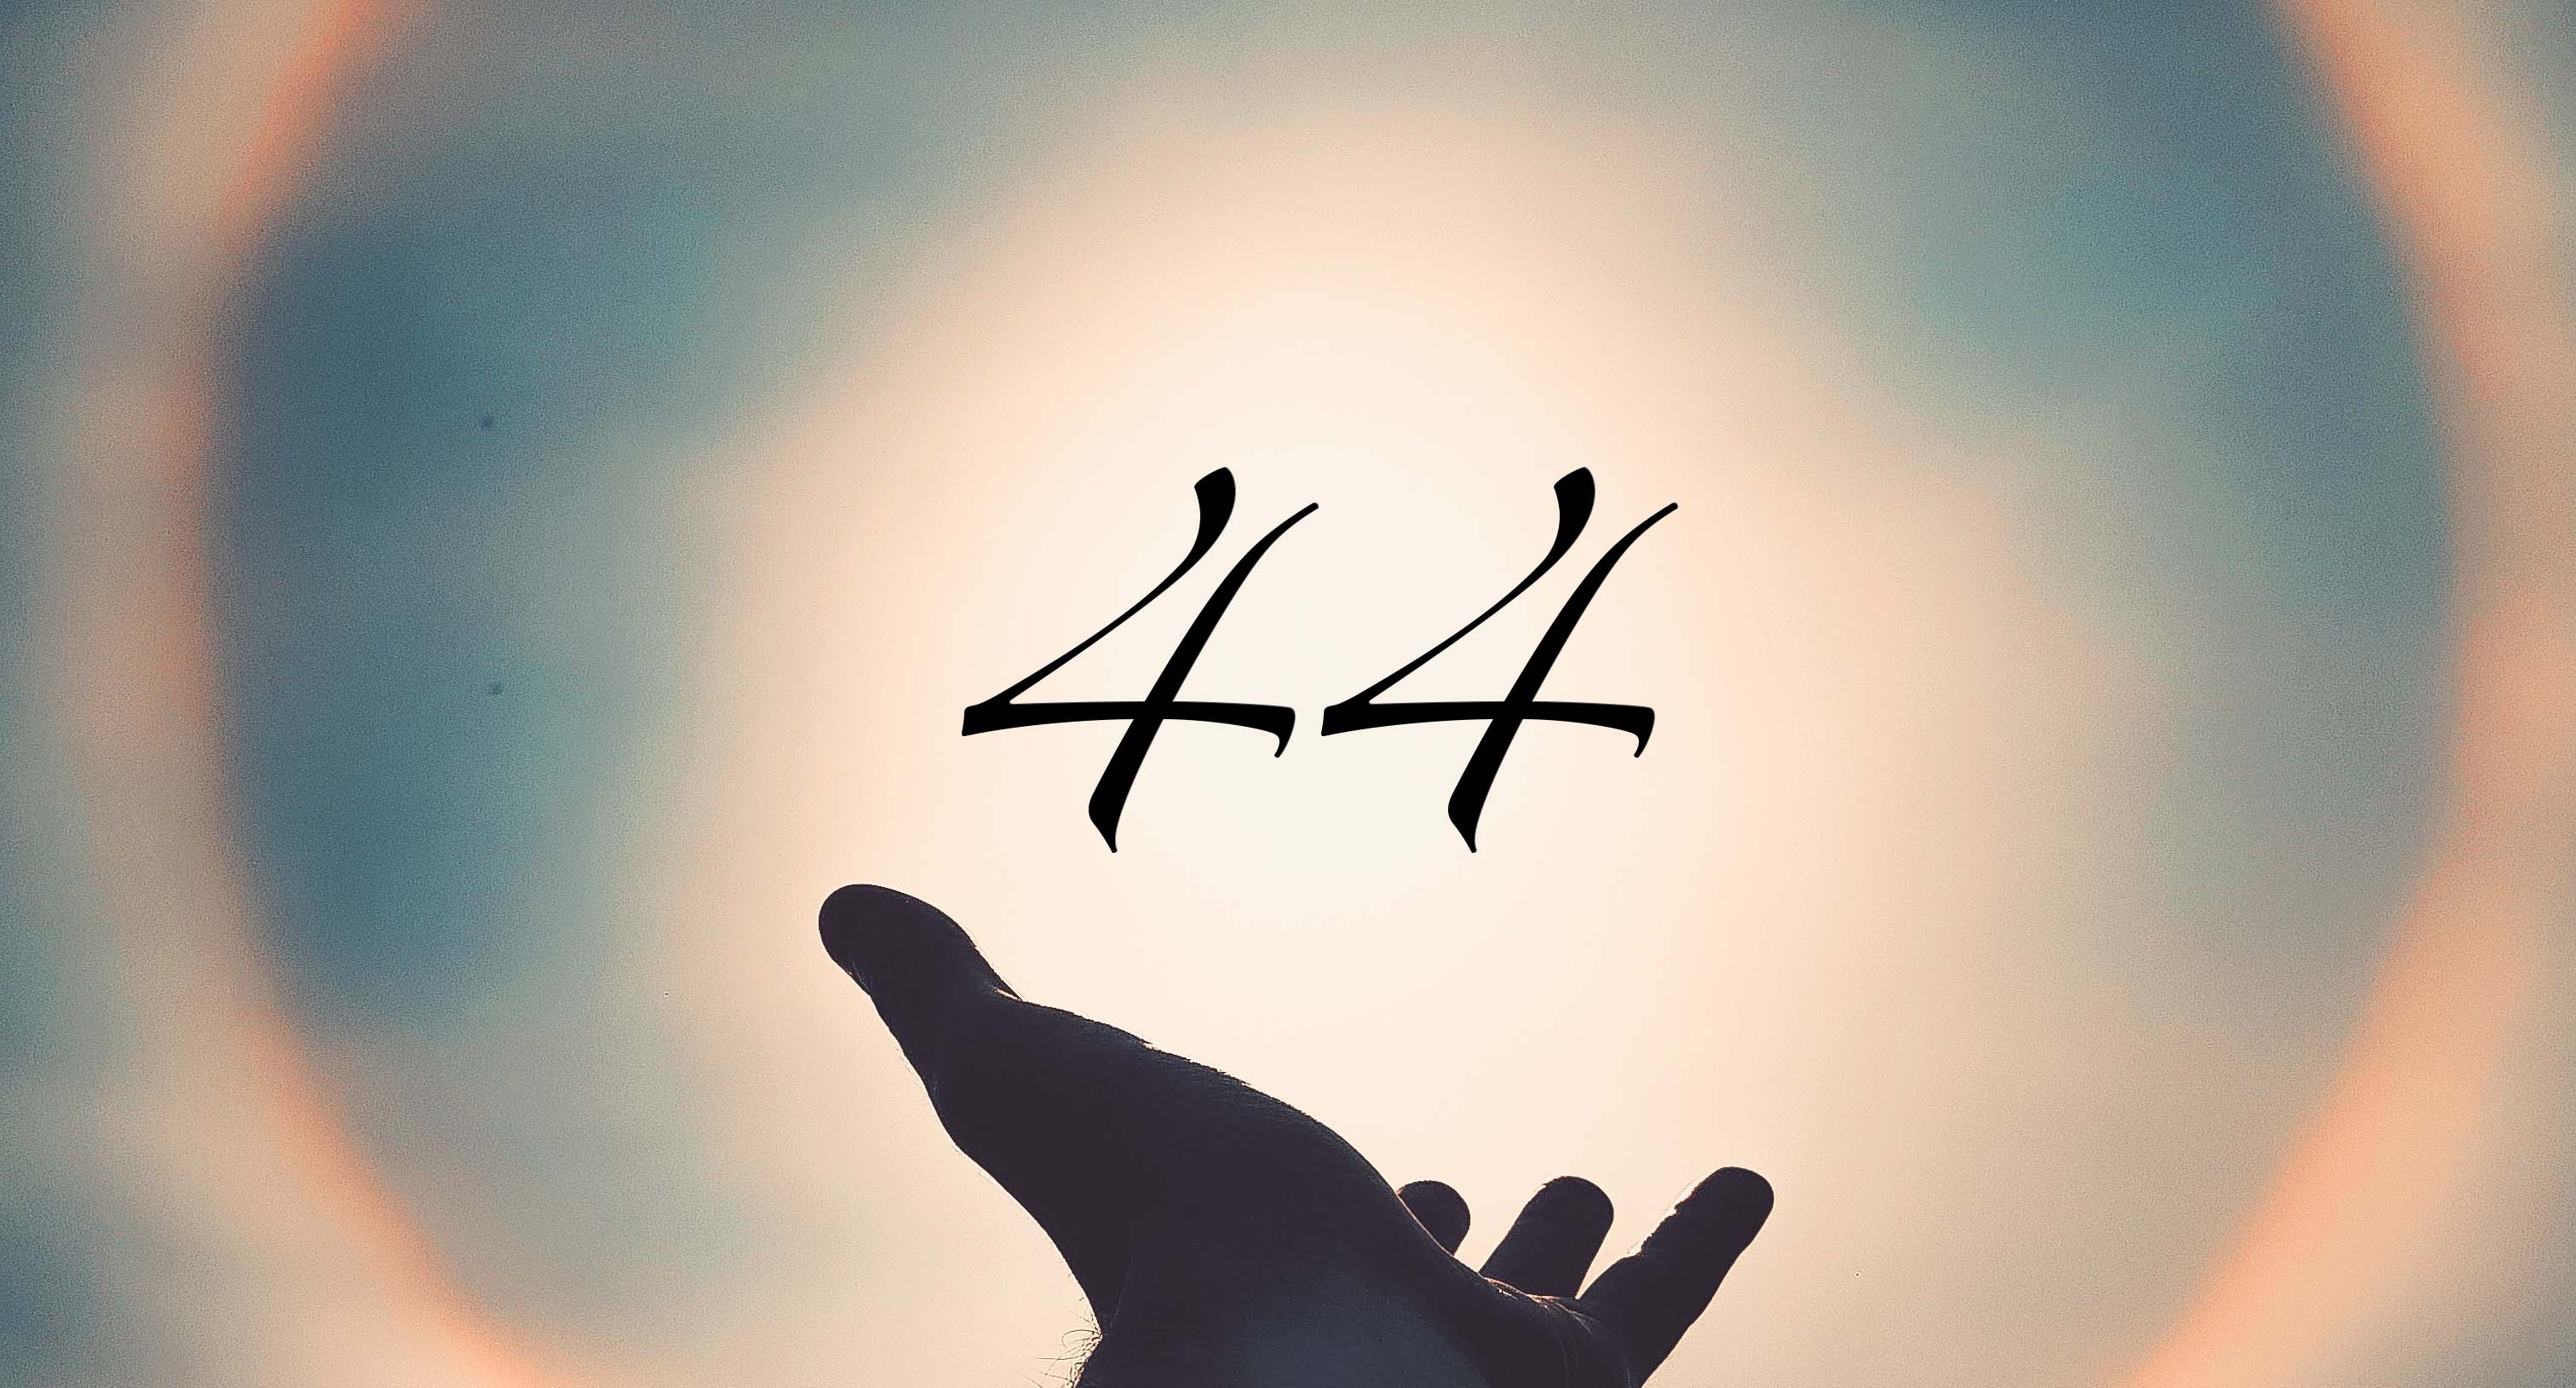 Hand pointing to the sun with number 44 on top of it